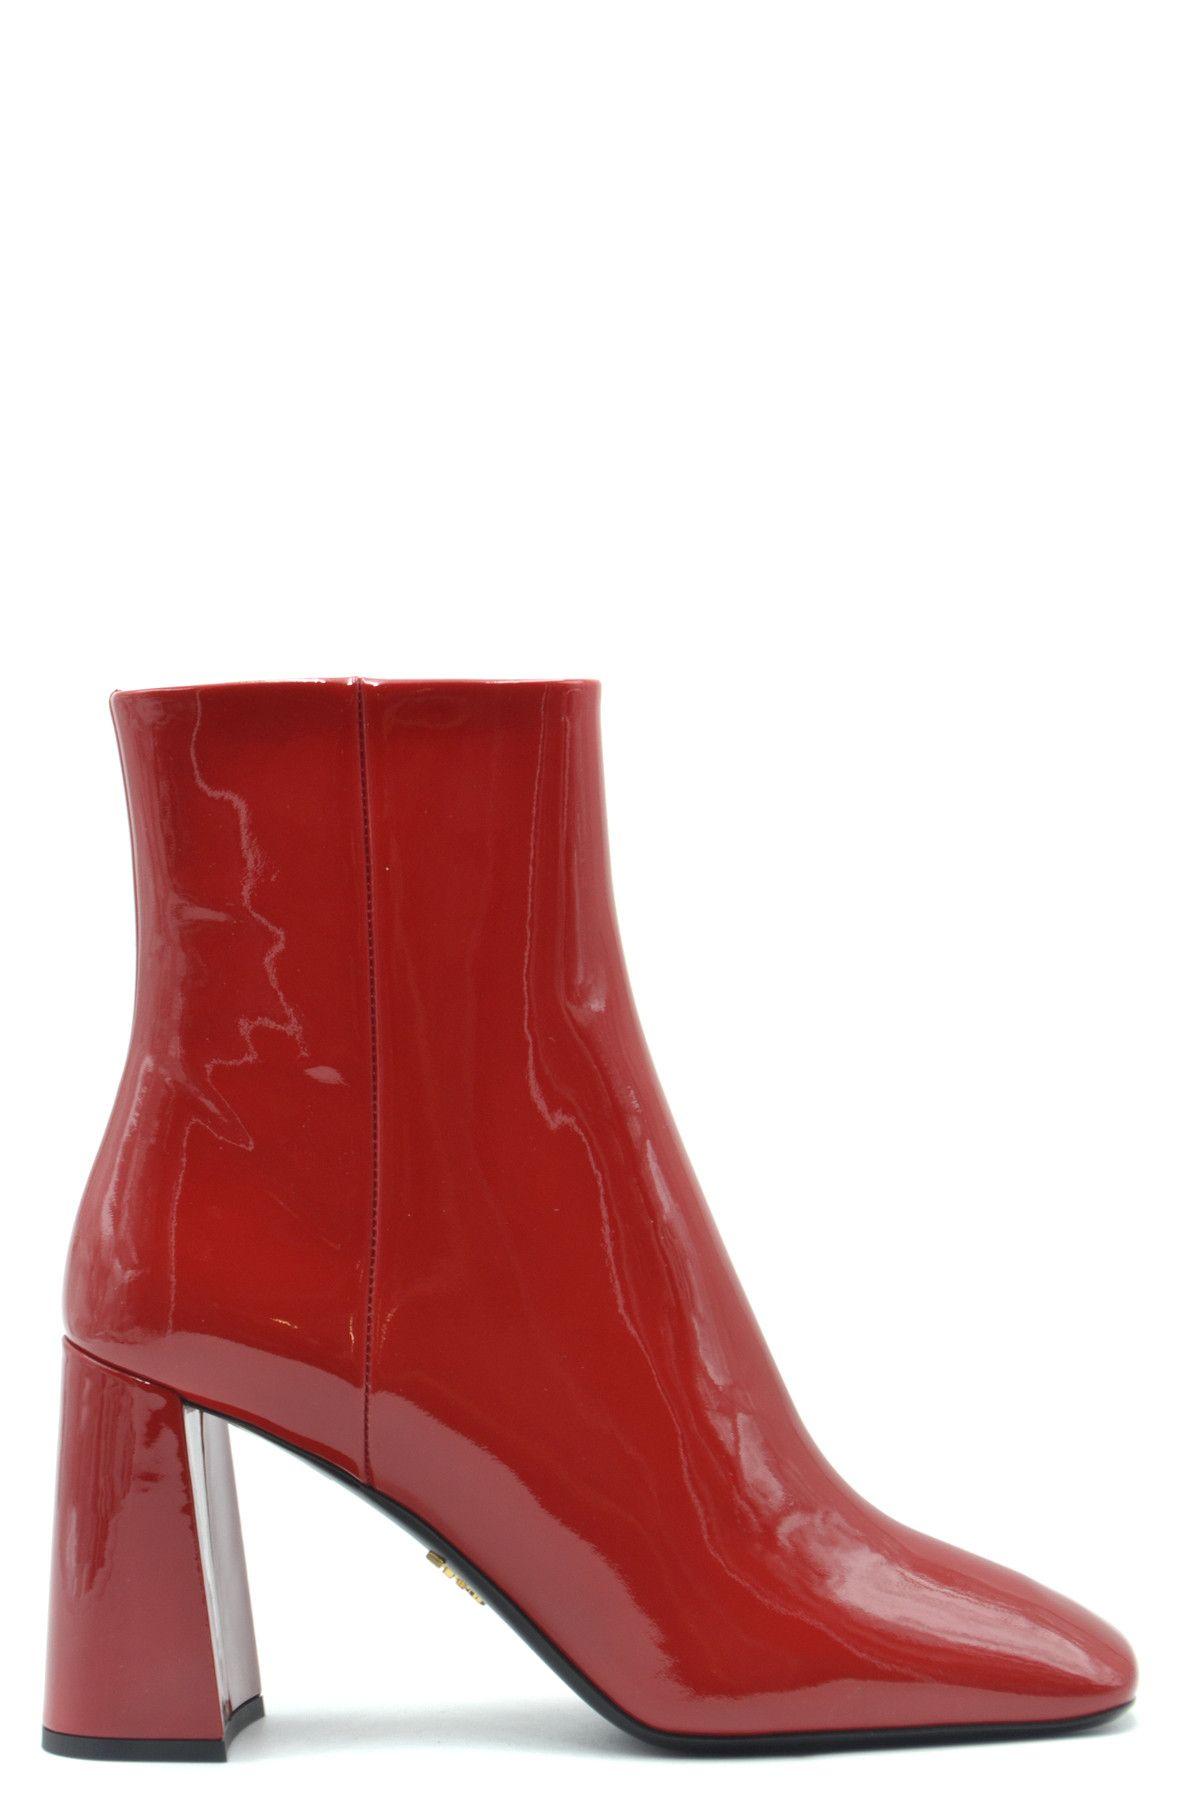 Prada Women's Leather Heel Ankle Boots Booties in Red - Save 57% - Lyst